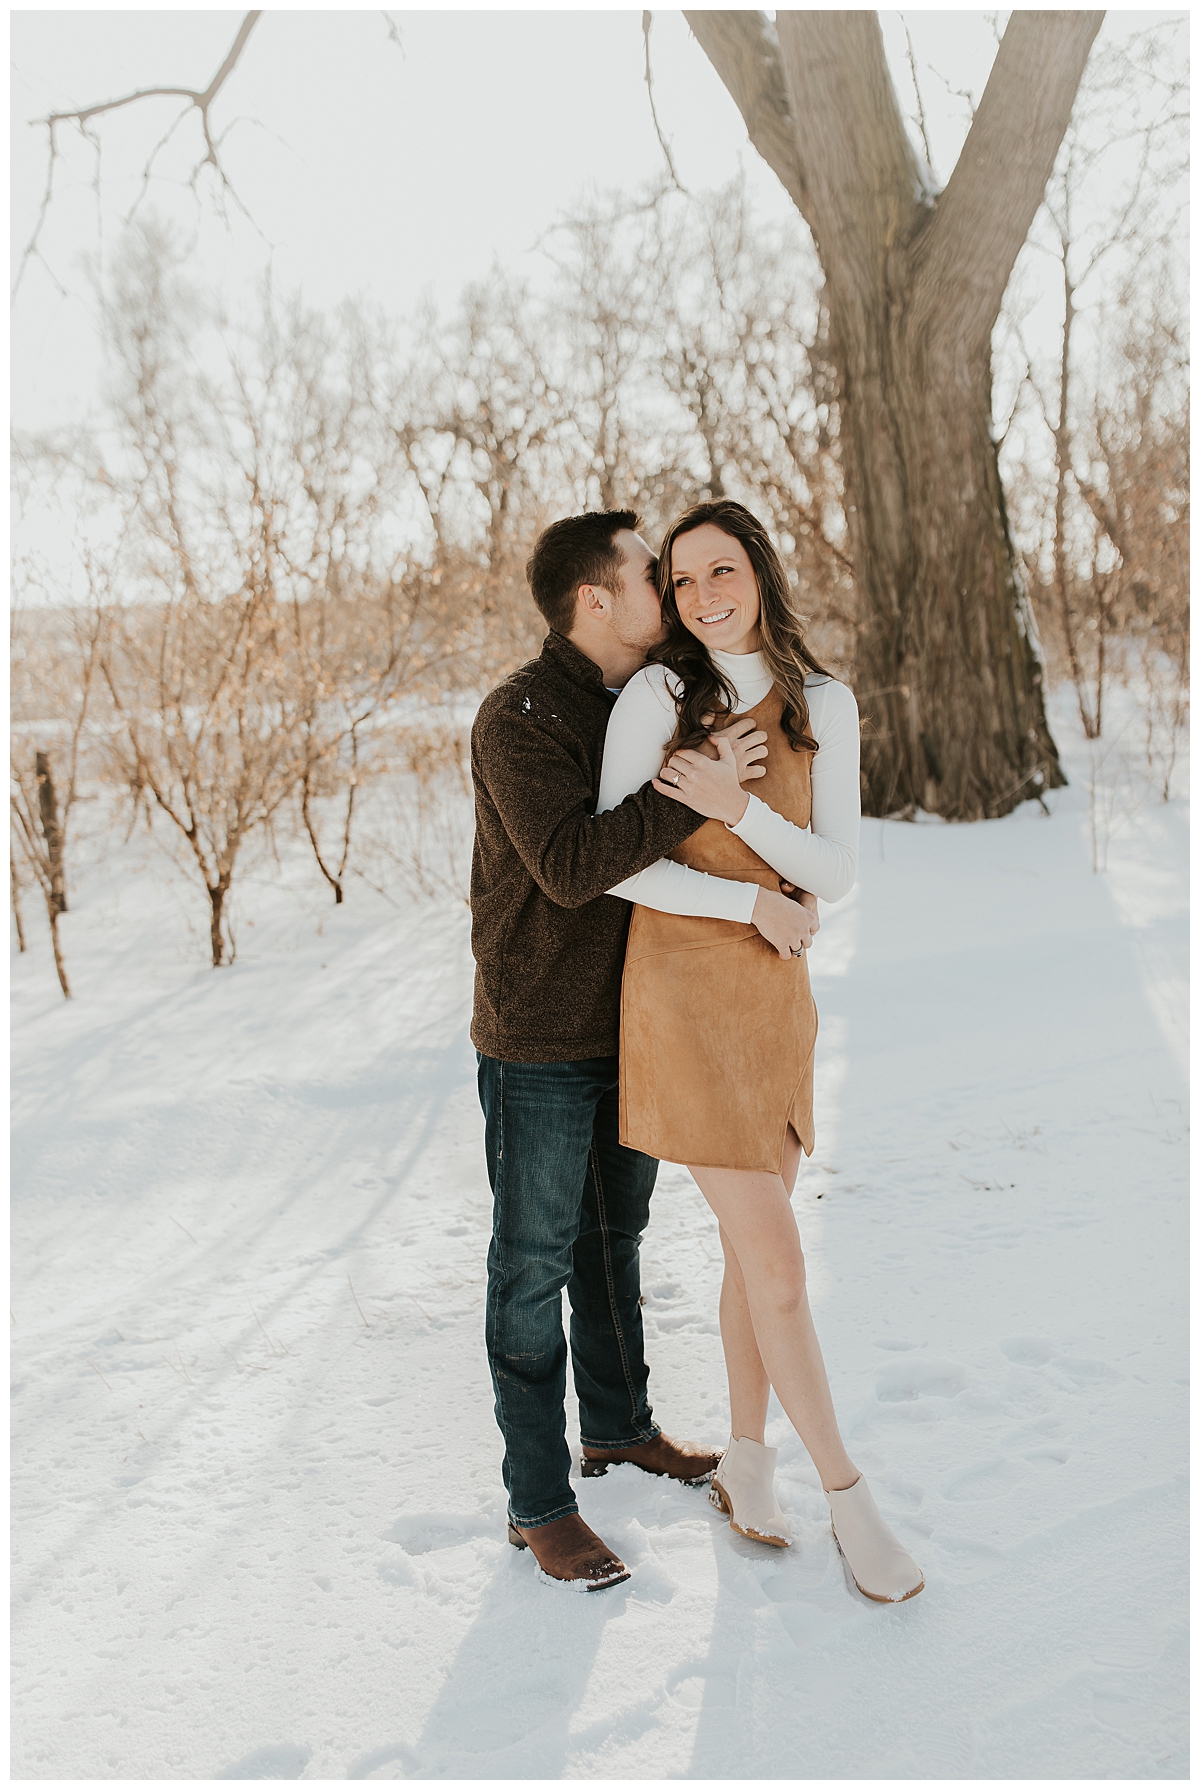 Deana Coufal Photography Winter Engagement Session